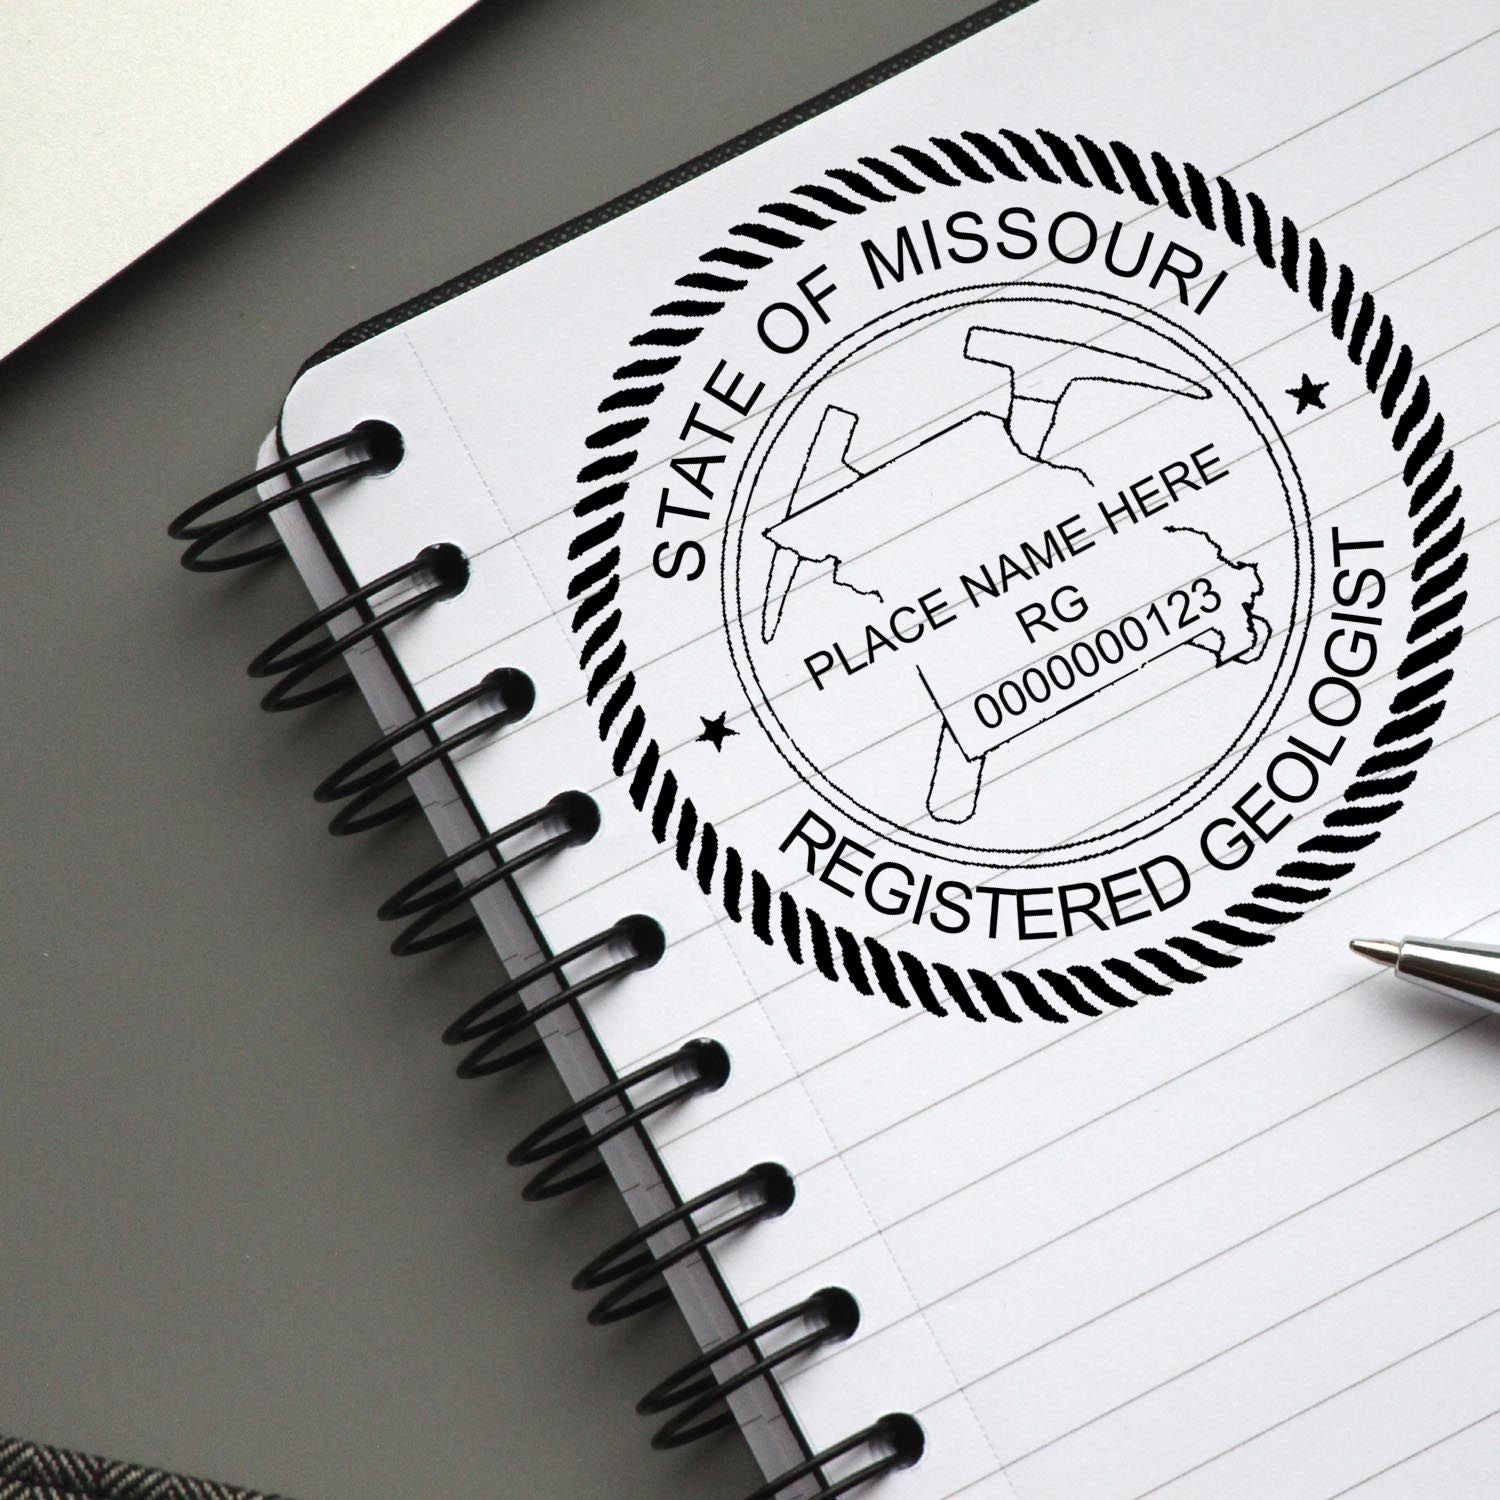 The main image for the Slim Pre-Inked Missouri Professional Geologist Seal Stamp depicting a sample of the imprint and imprint sample